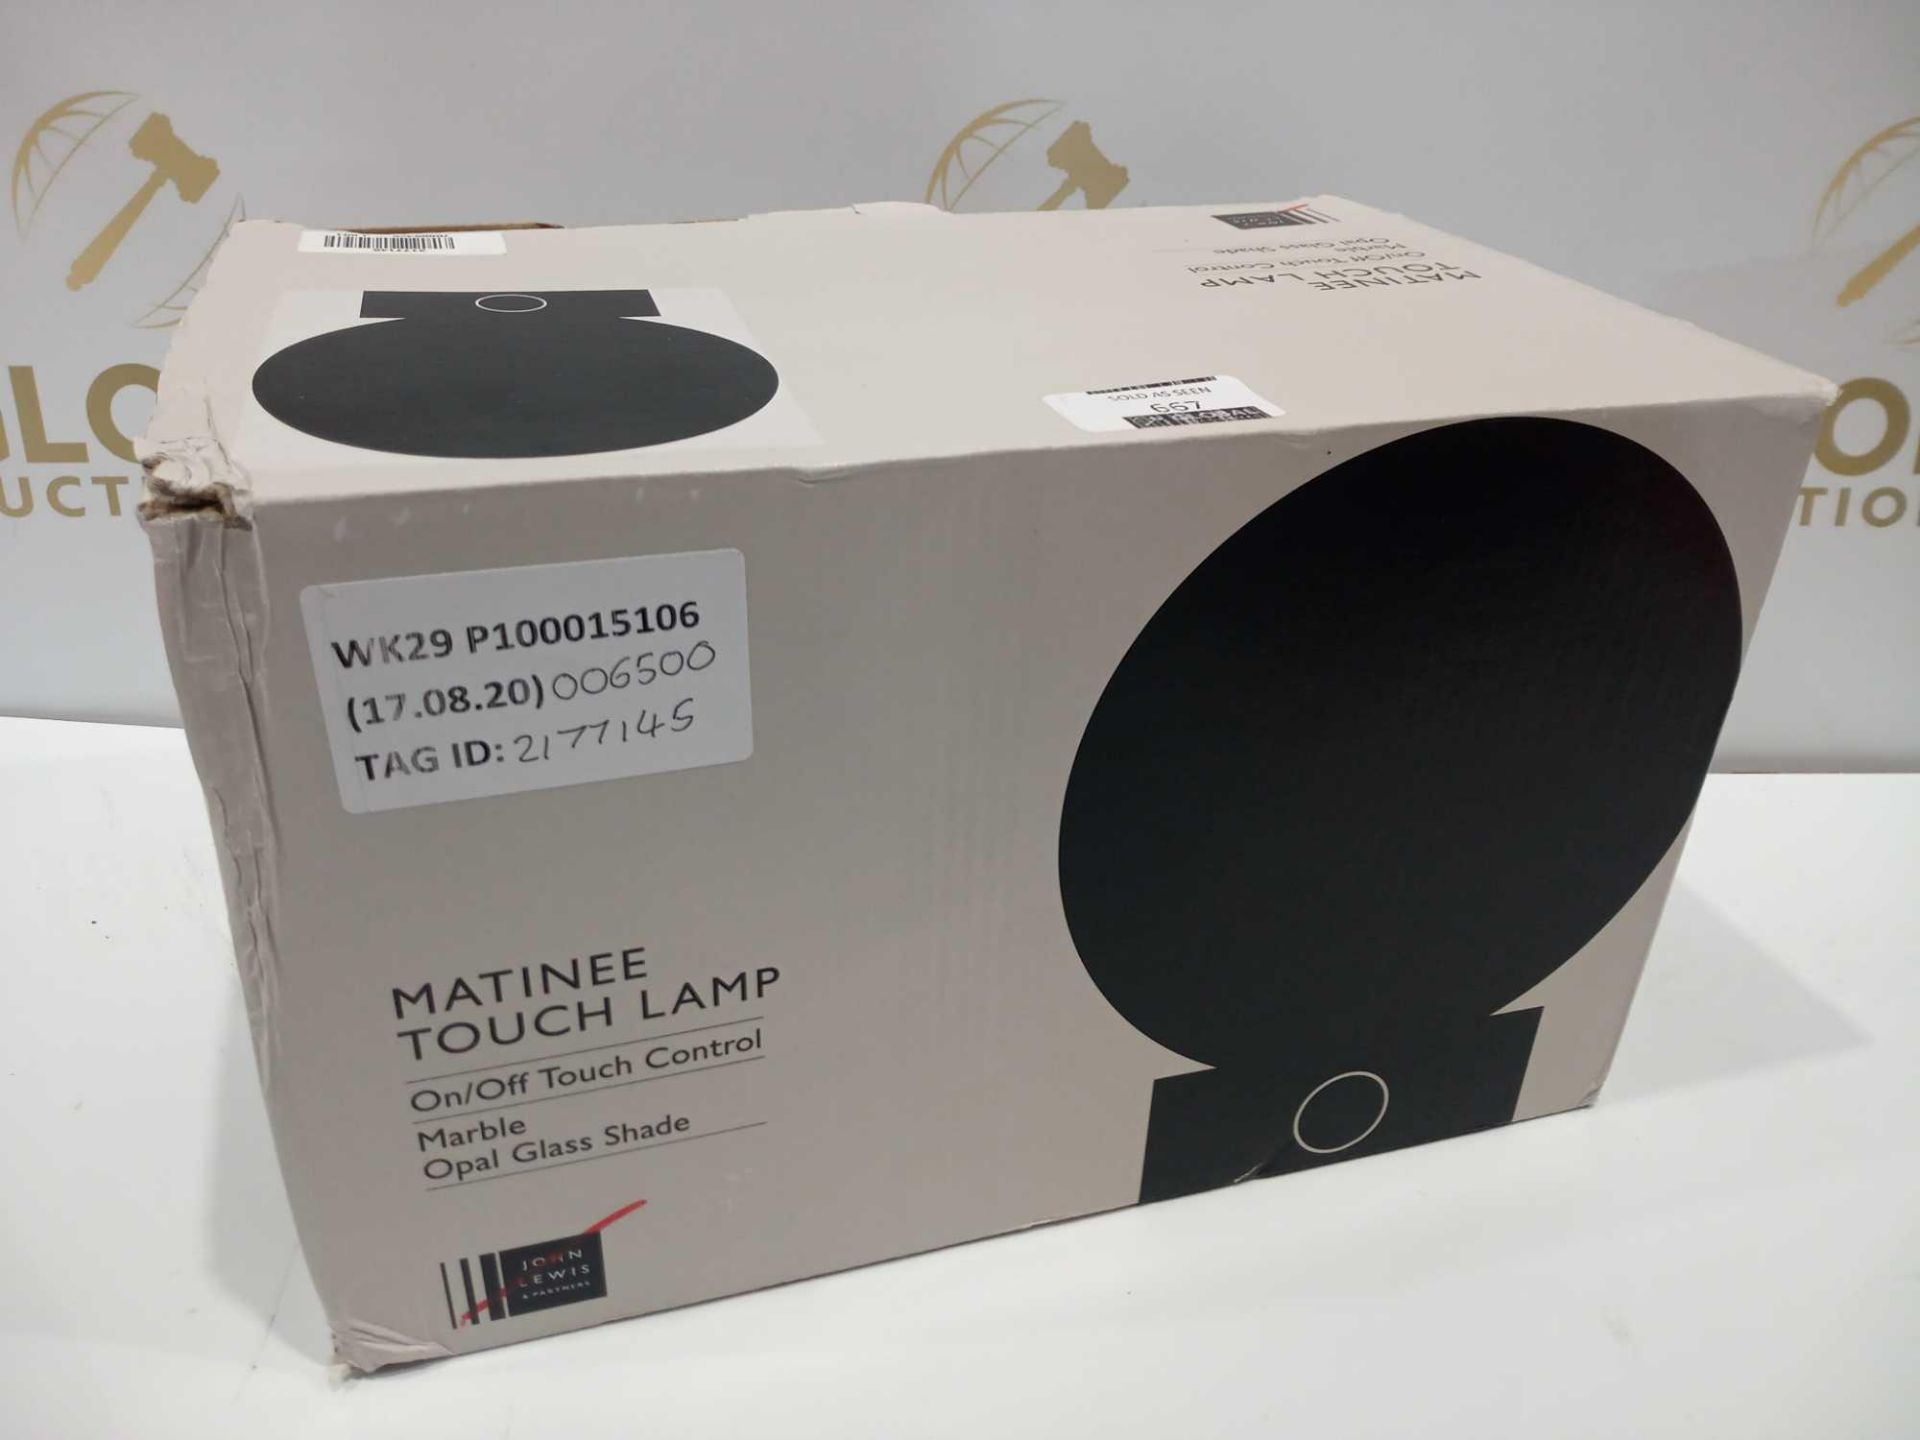 Rrp £50-£65 Boxed Assorted John Lewis And Partners Lighting Items